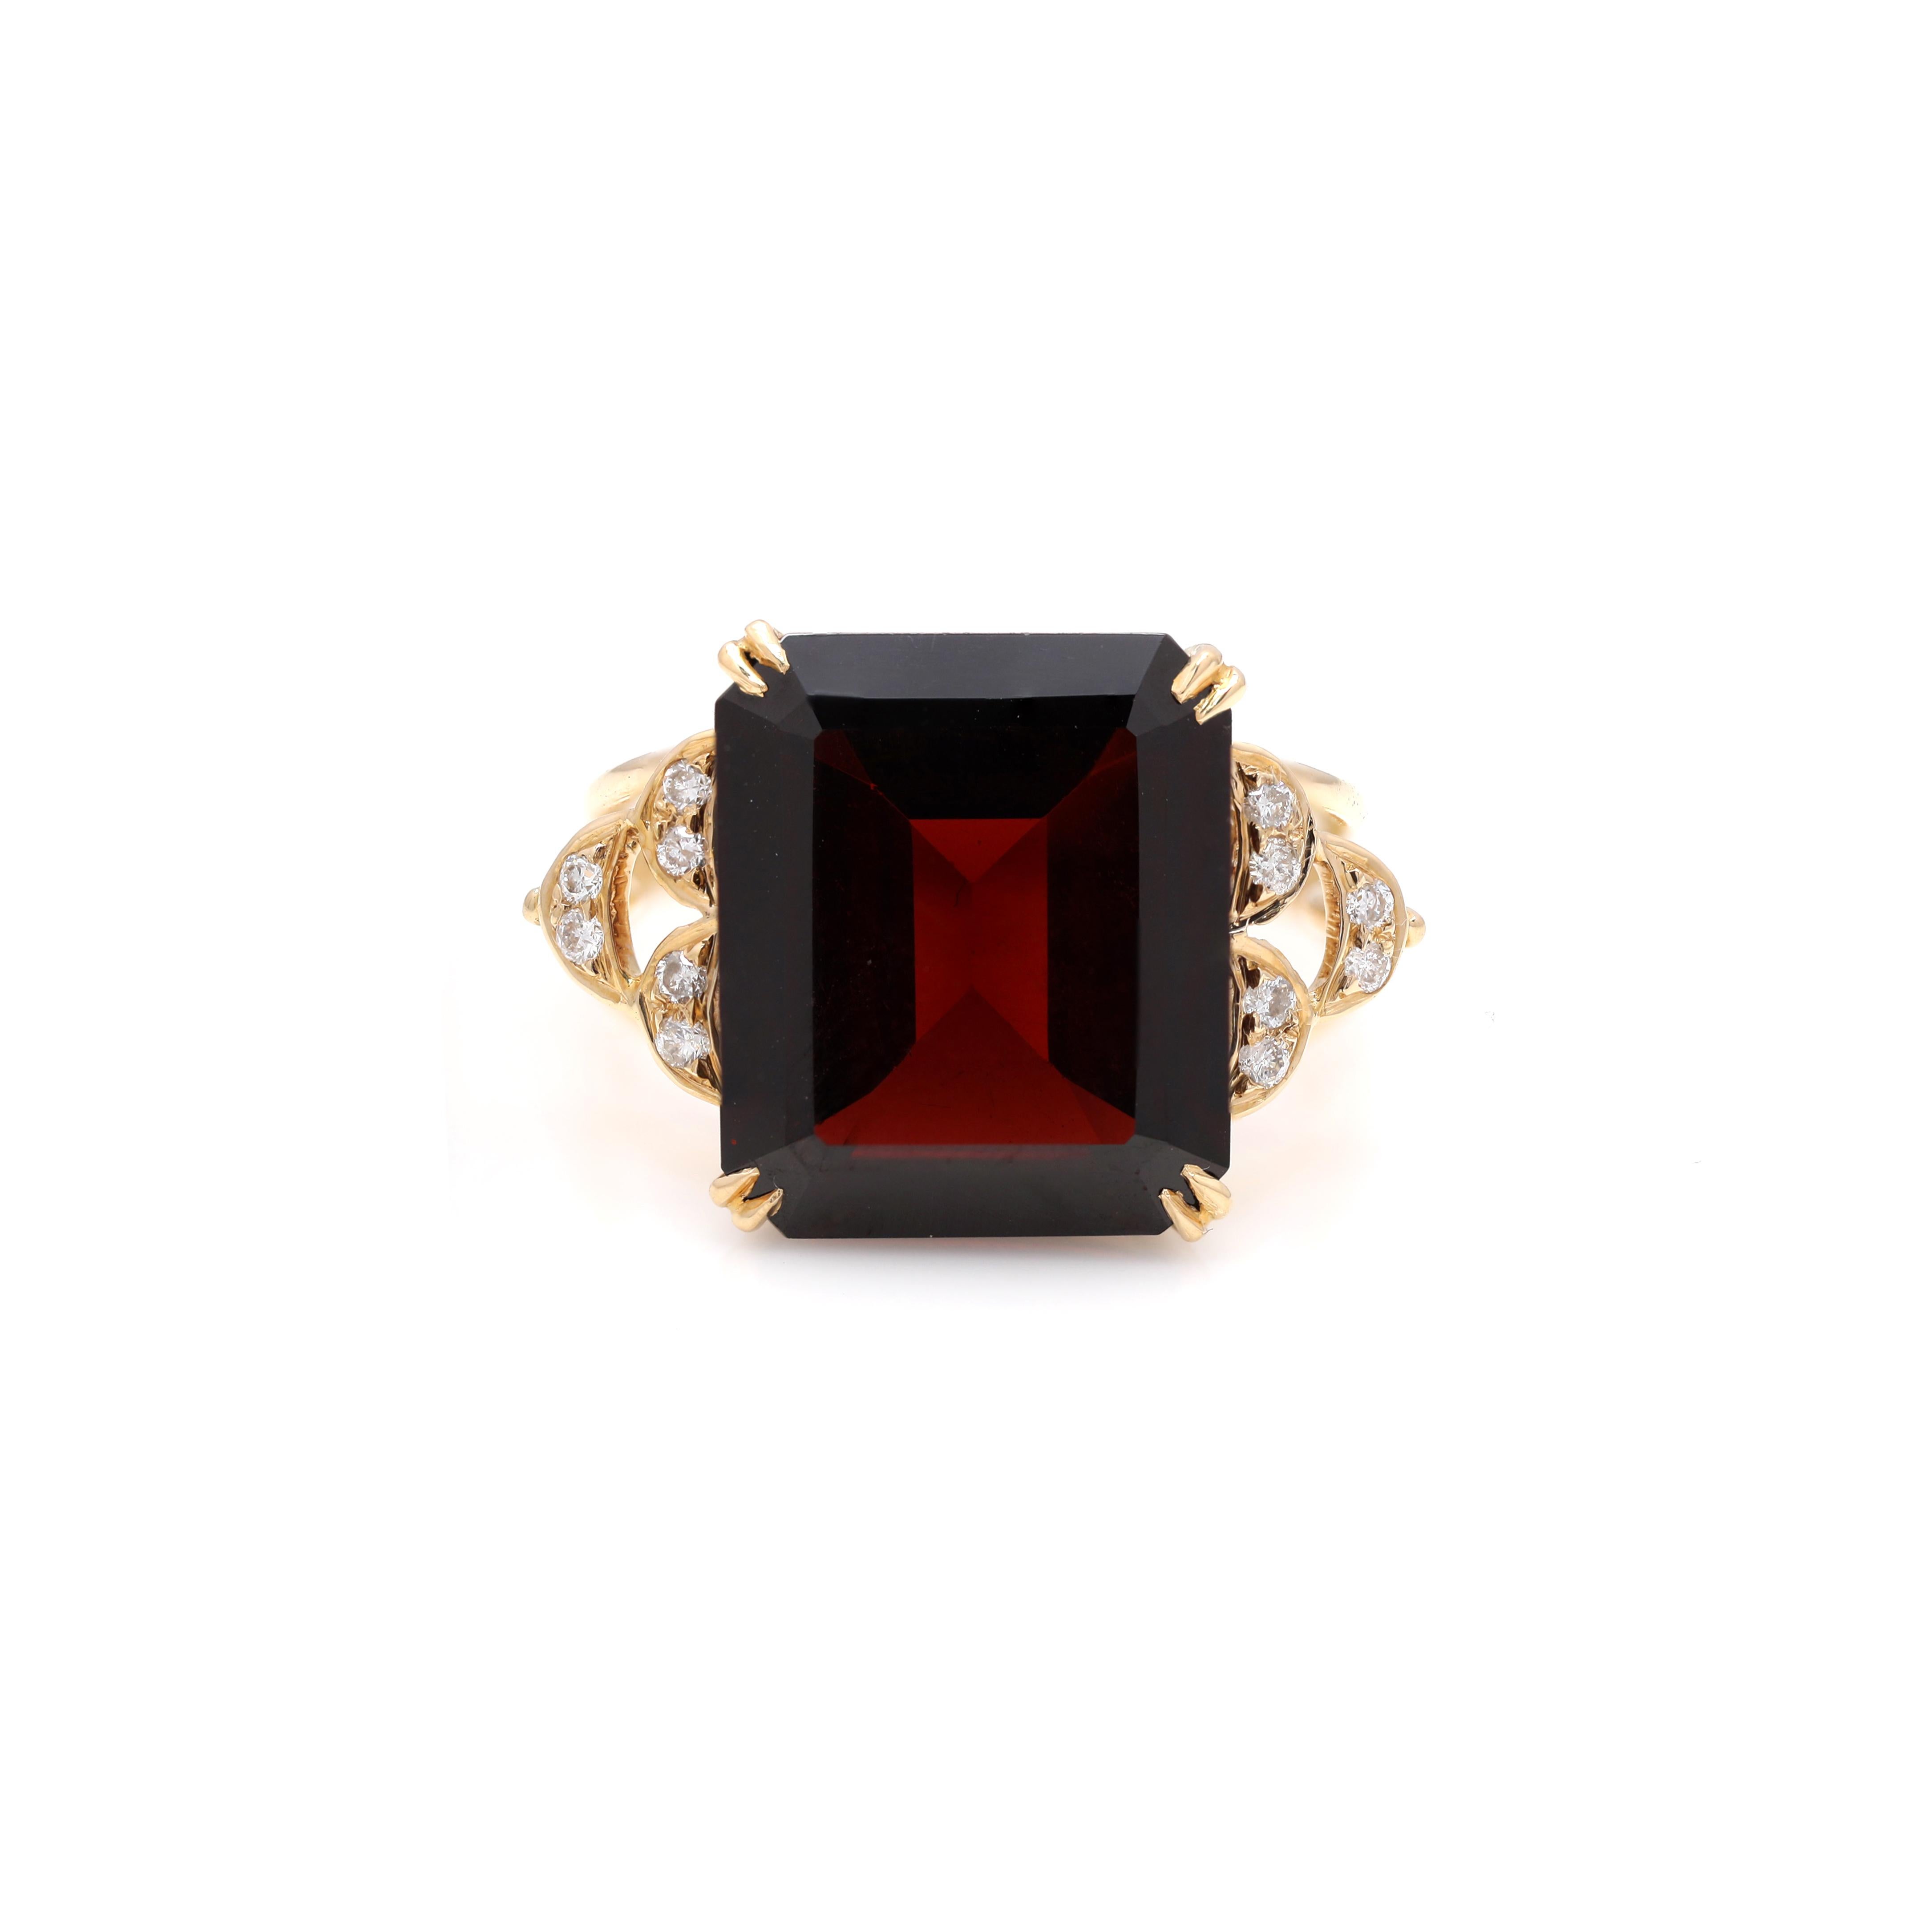 For Sale:  14k Solid Yellow Gold 10.7 Carat Deep Red Garnet Gemstone Ring with Diamonds 3